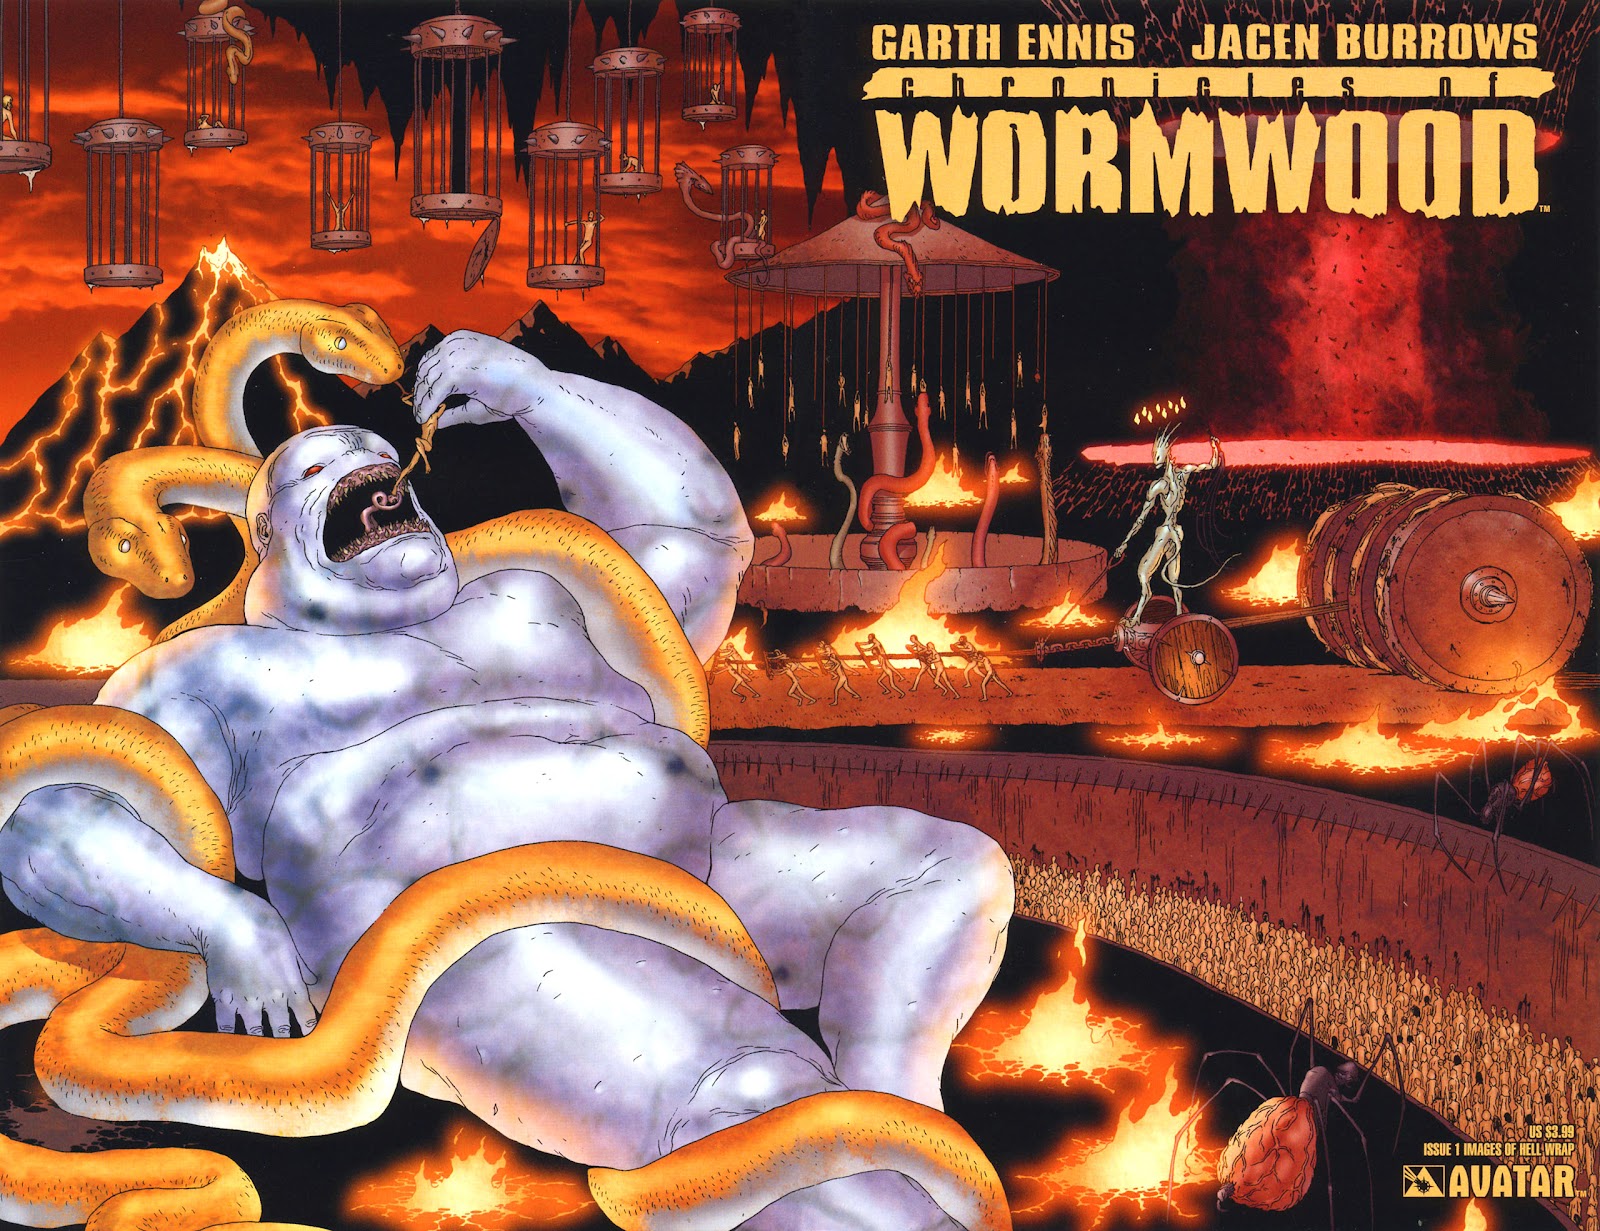 Chronicles Of Wormwood: The Last Battle Pics, Comics Collection